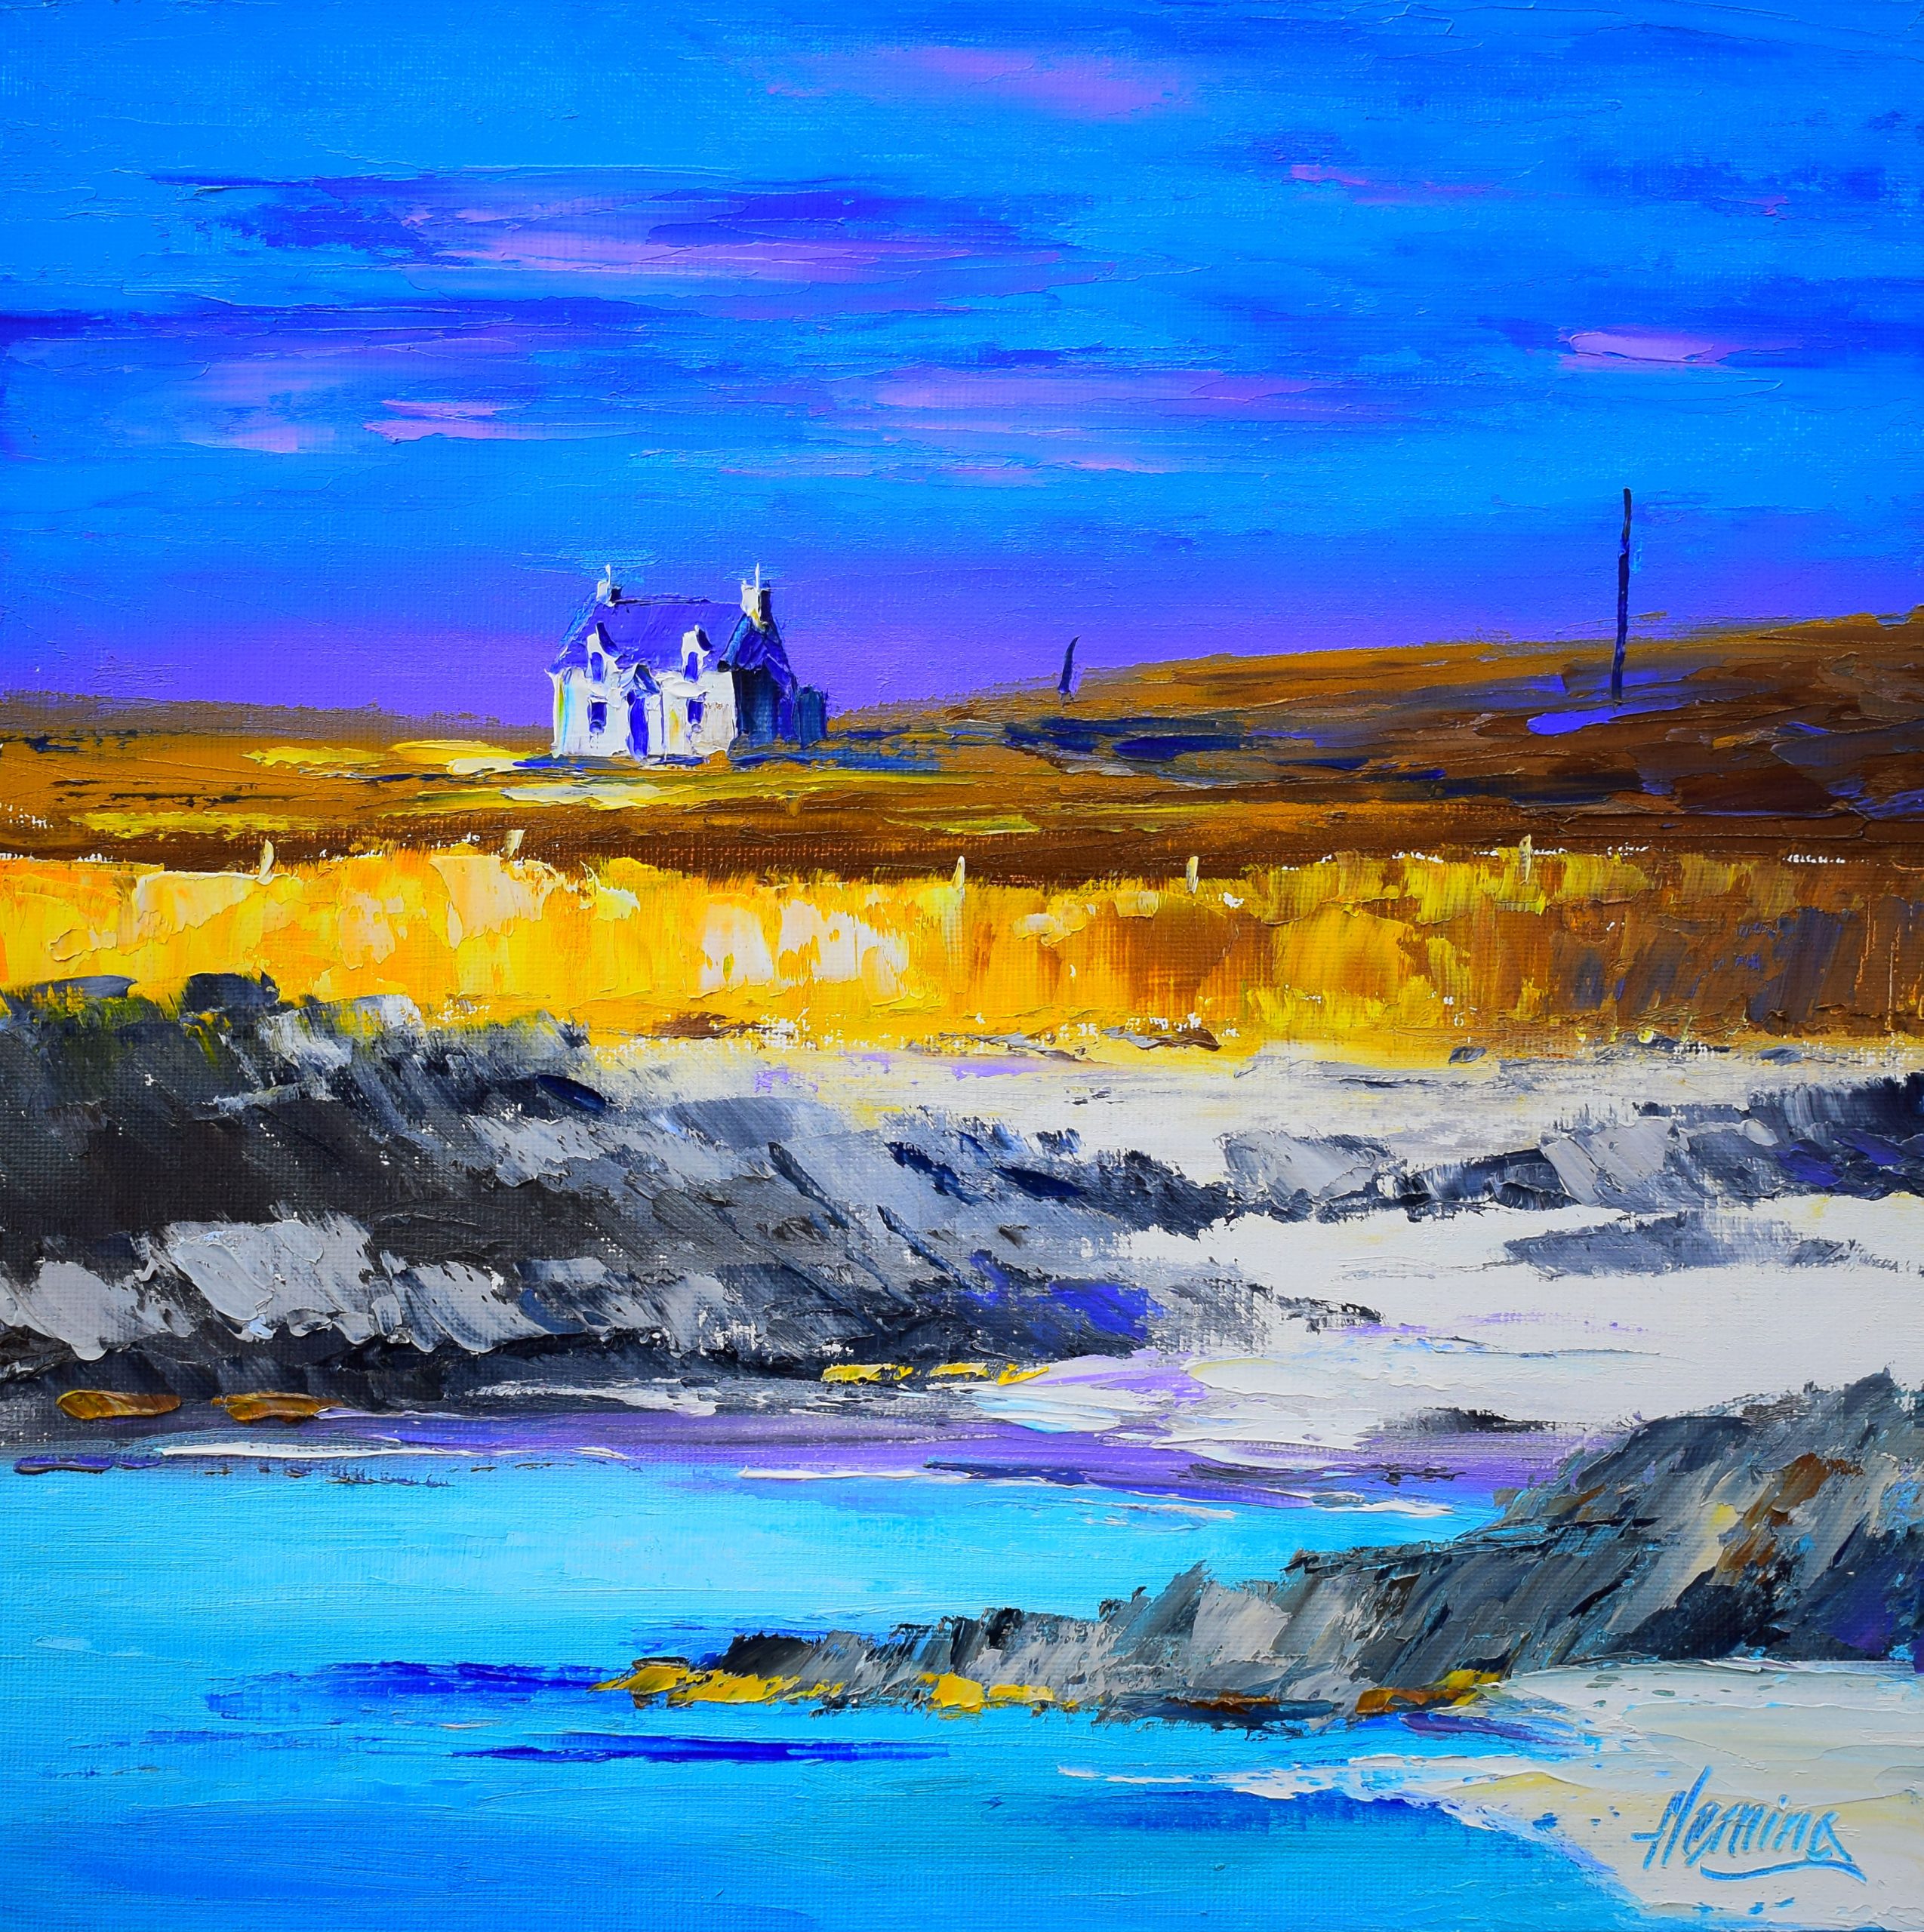 4.Cottage by the Shore, Late Summer, Sanna, Ardnamurchan